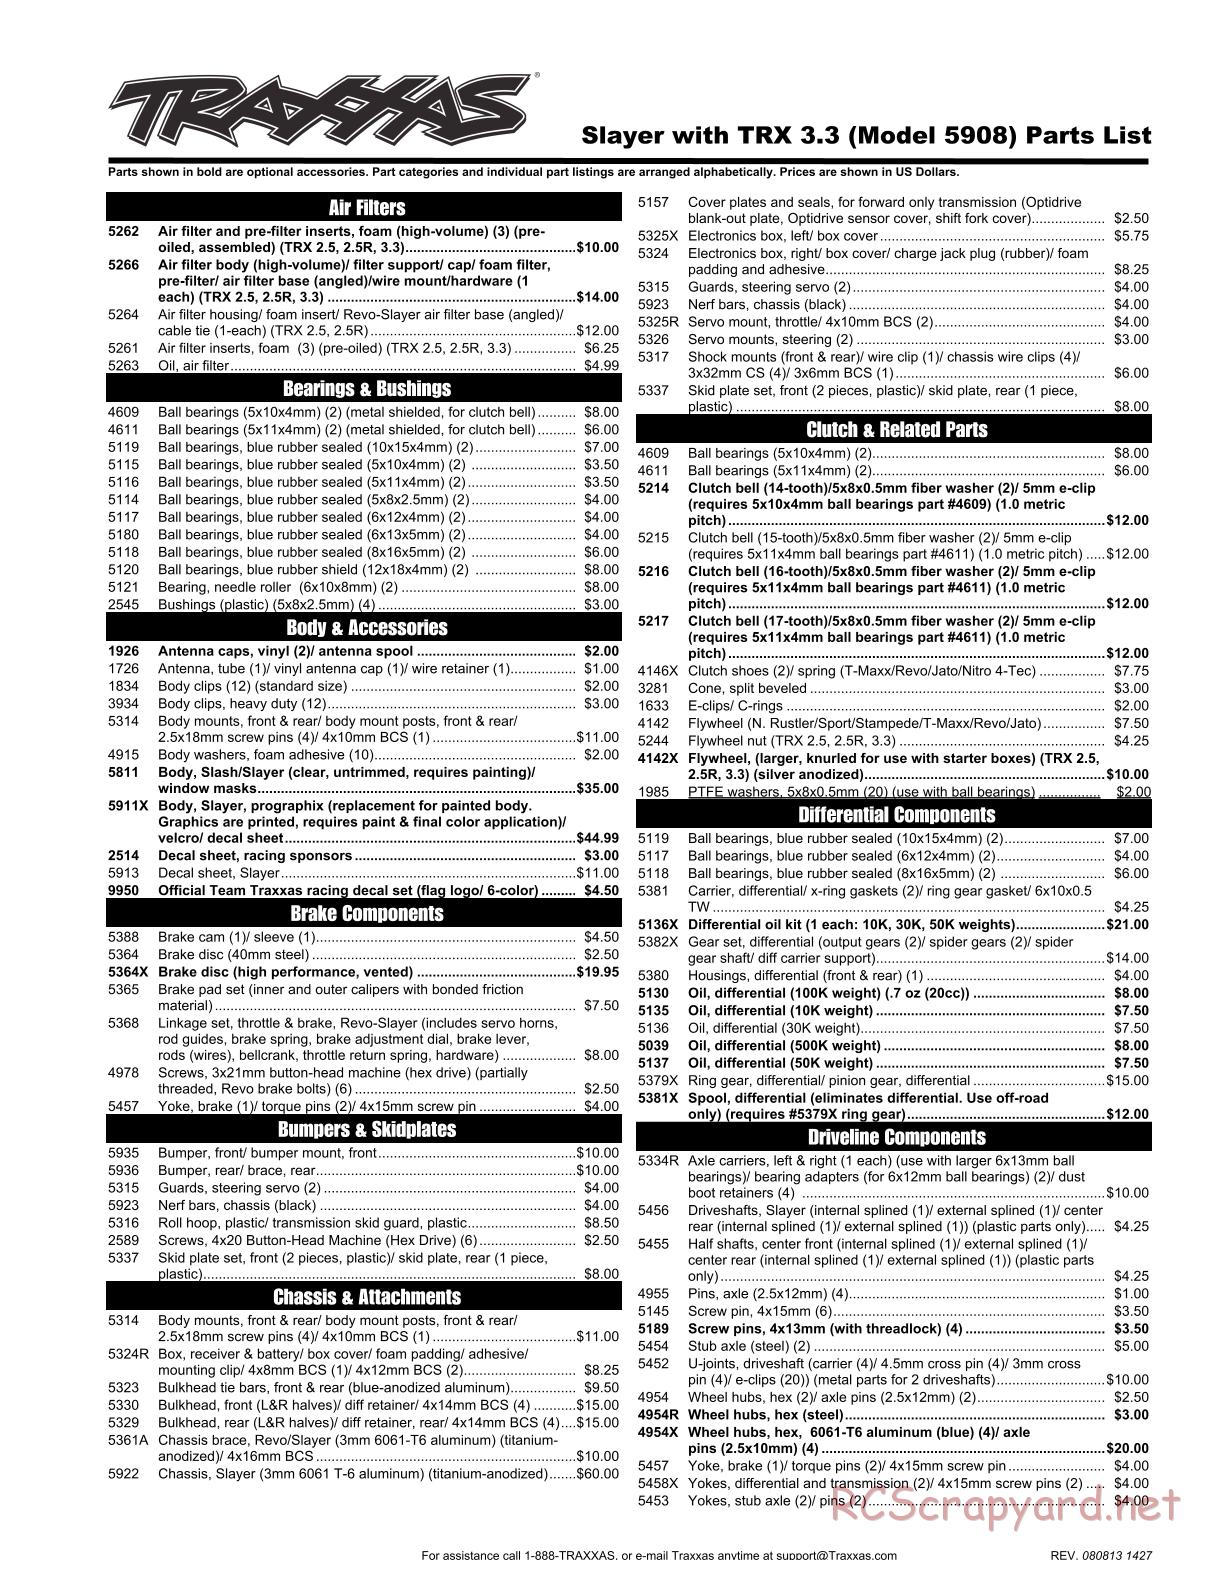 Traxxas - Slayer Pro 4WD (2008) - Parts List - Page 1